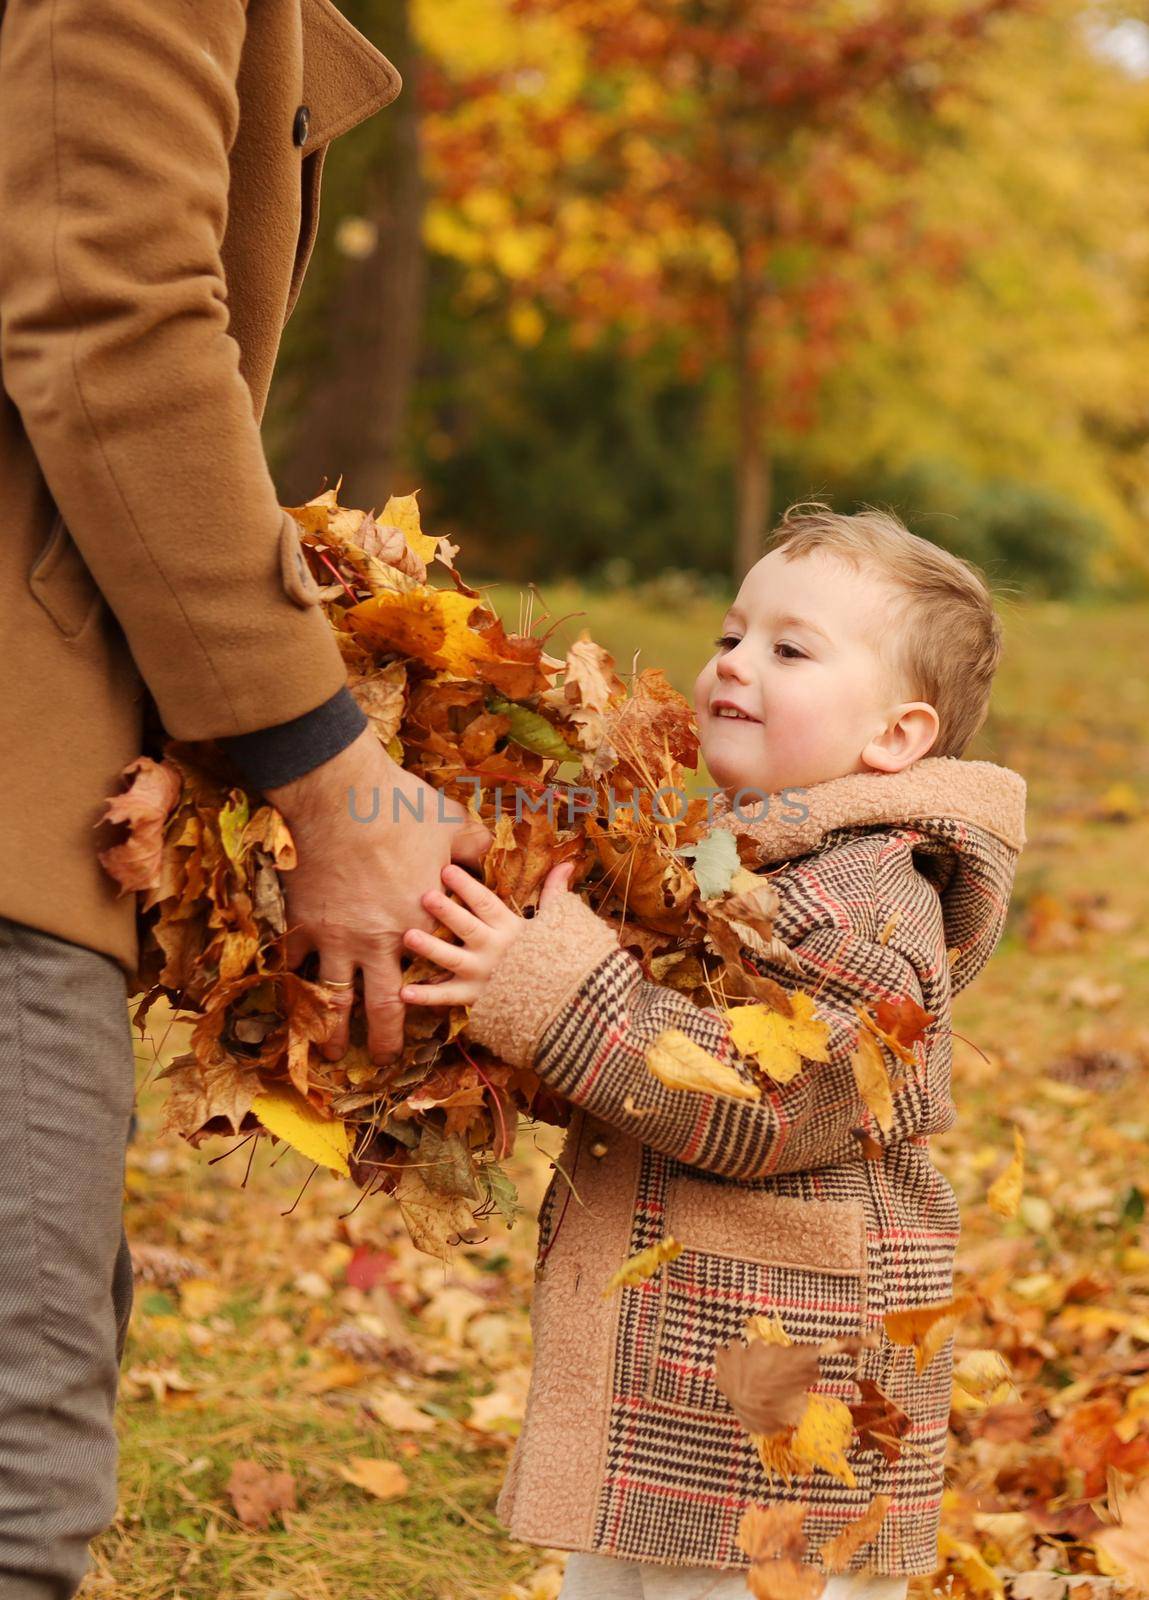 Outdoor fun in autumn. Father and son playing with autumn fallen leaves in park